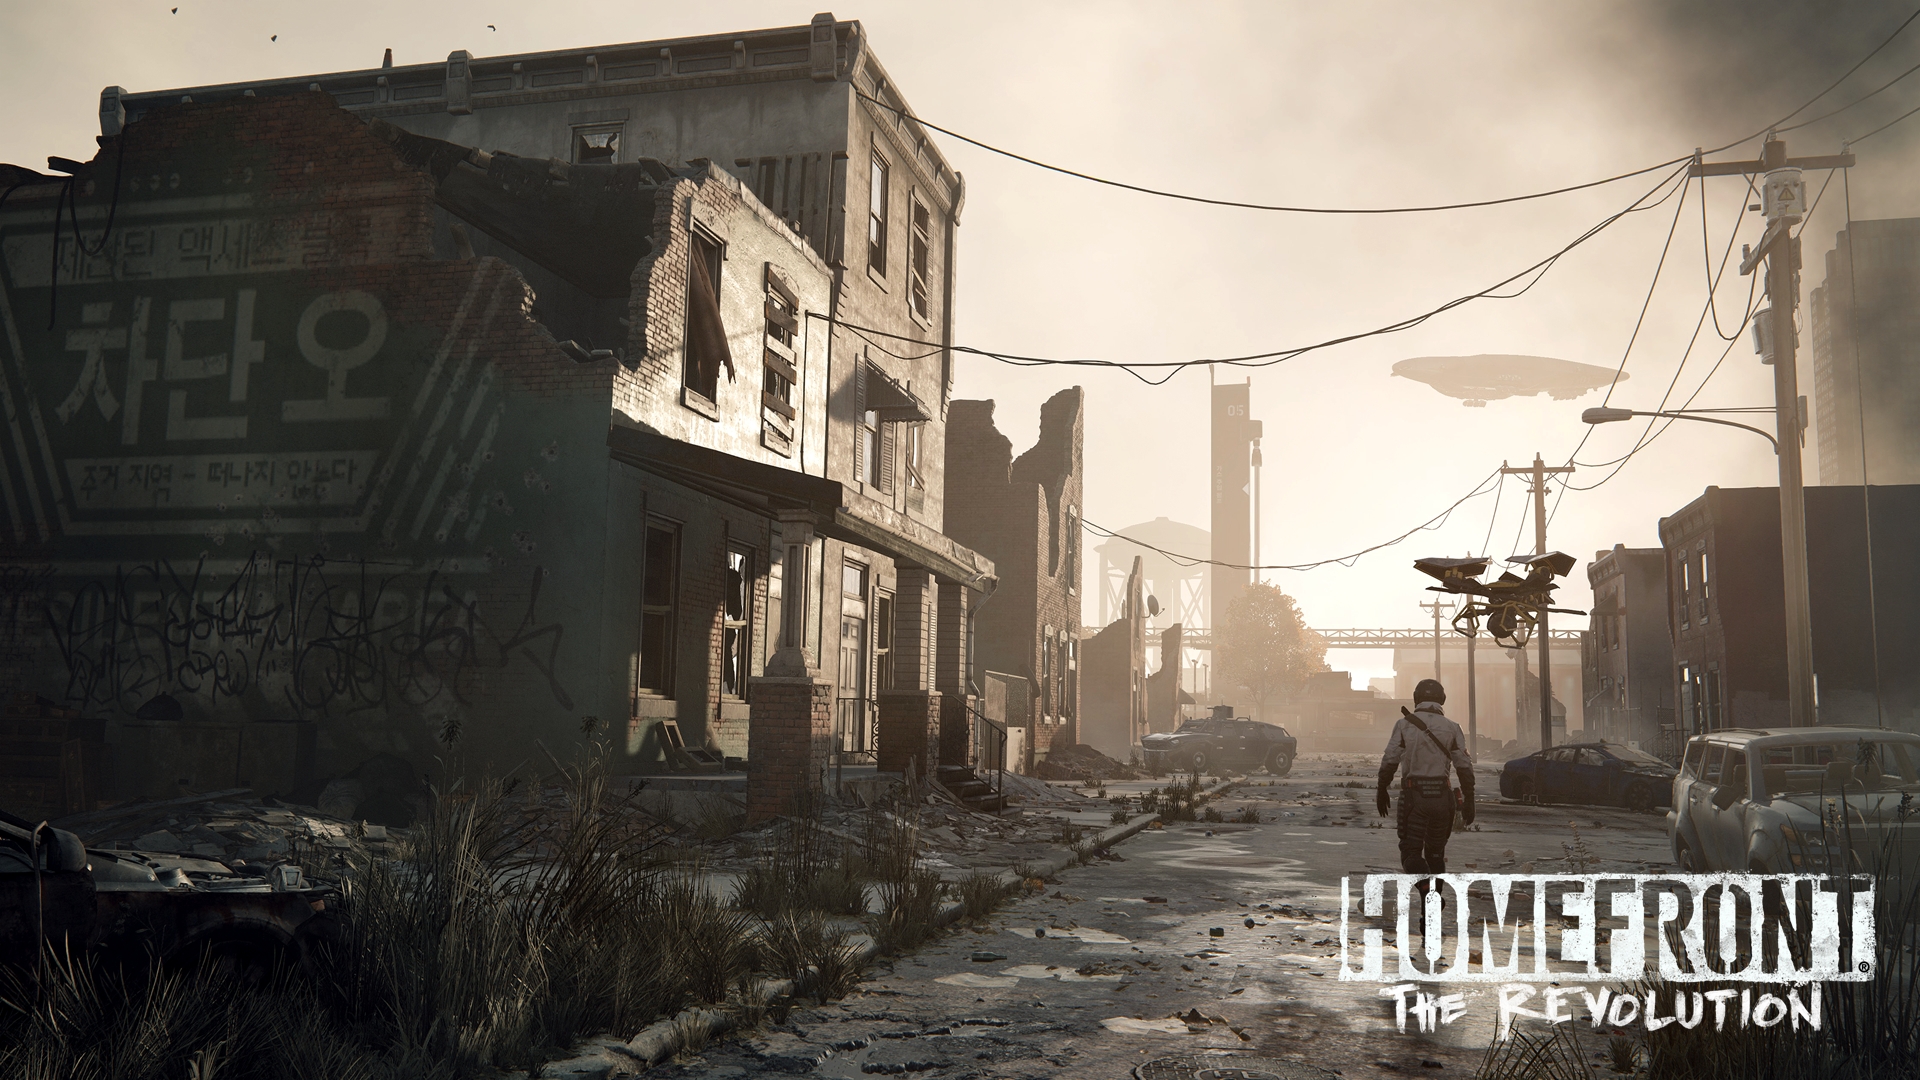 Homefront The Revolution HD Wallpaper Image New